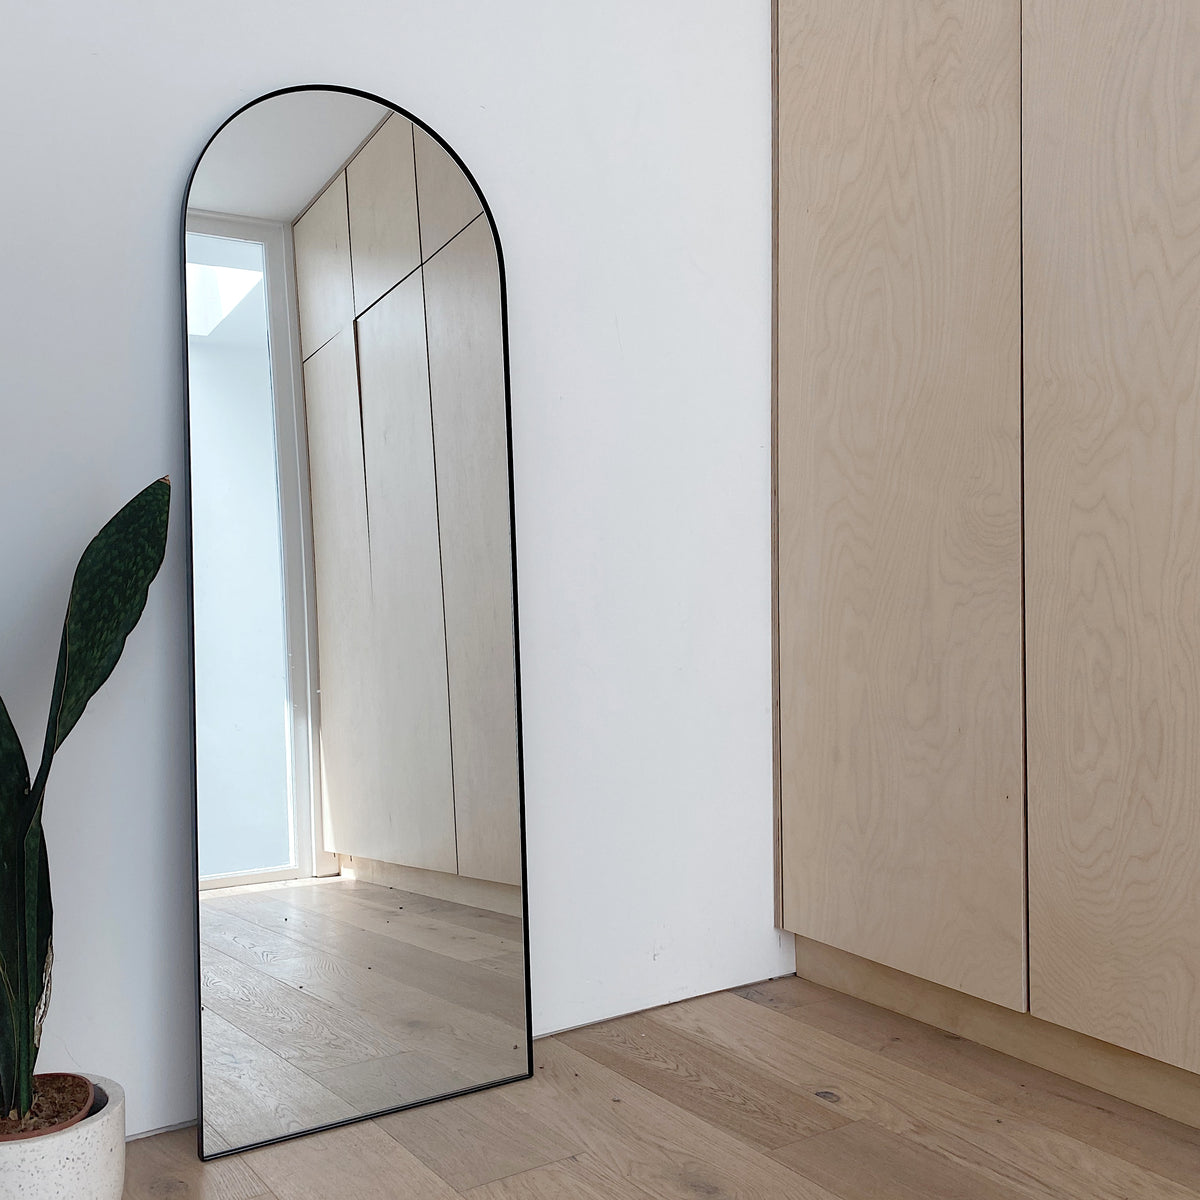 Theo - Full Length Black Arched Large Metal Mirror 150cm x 50cm